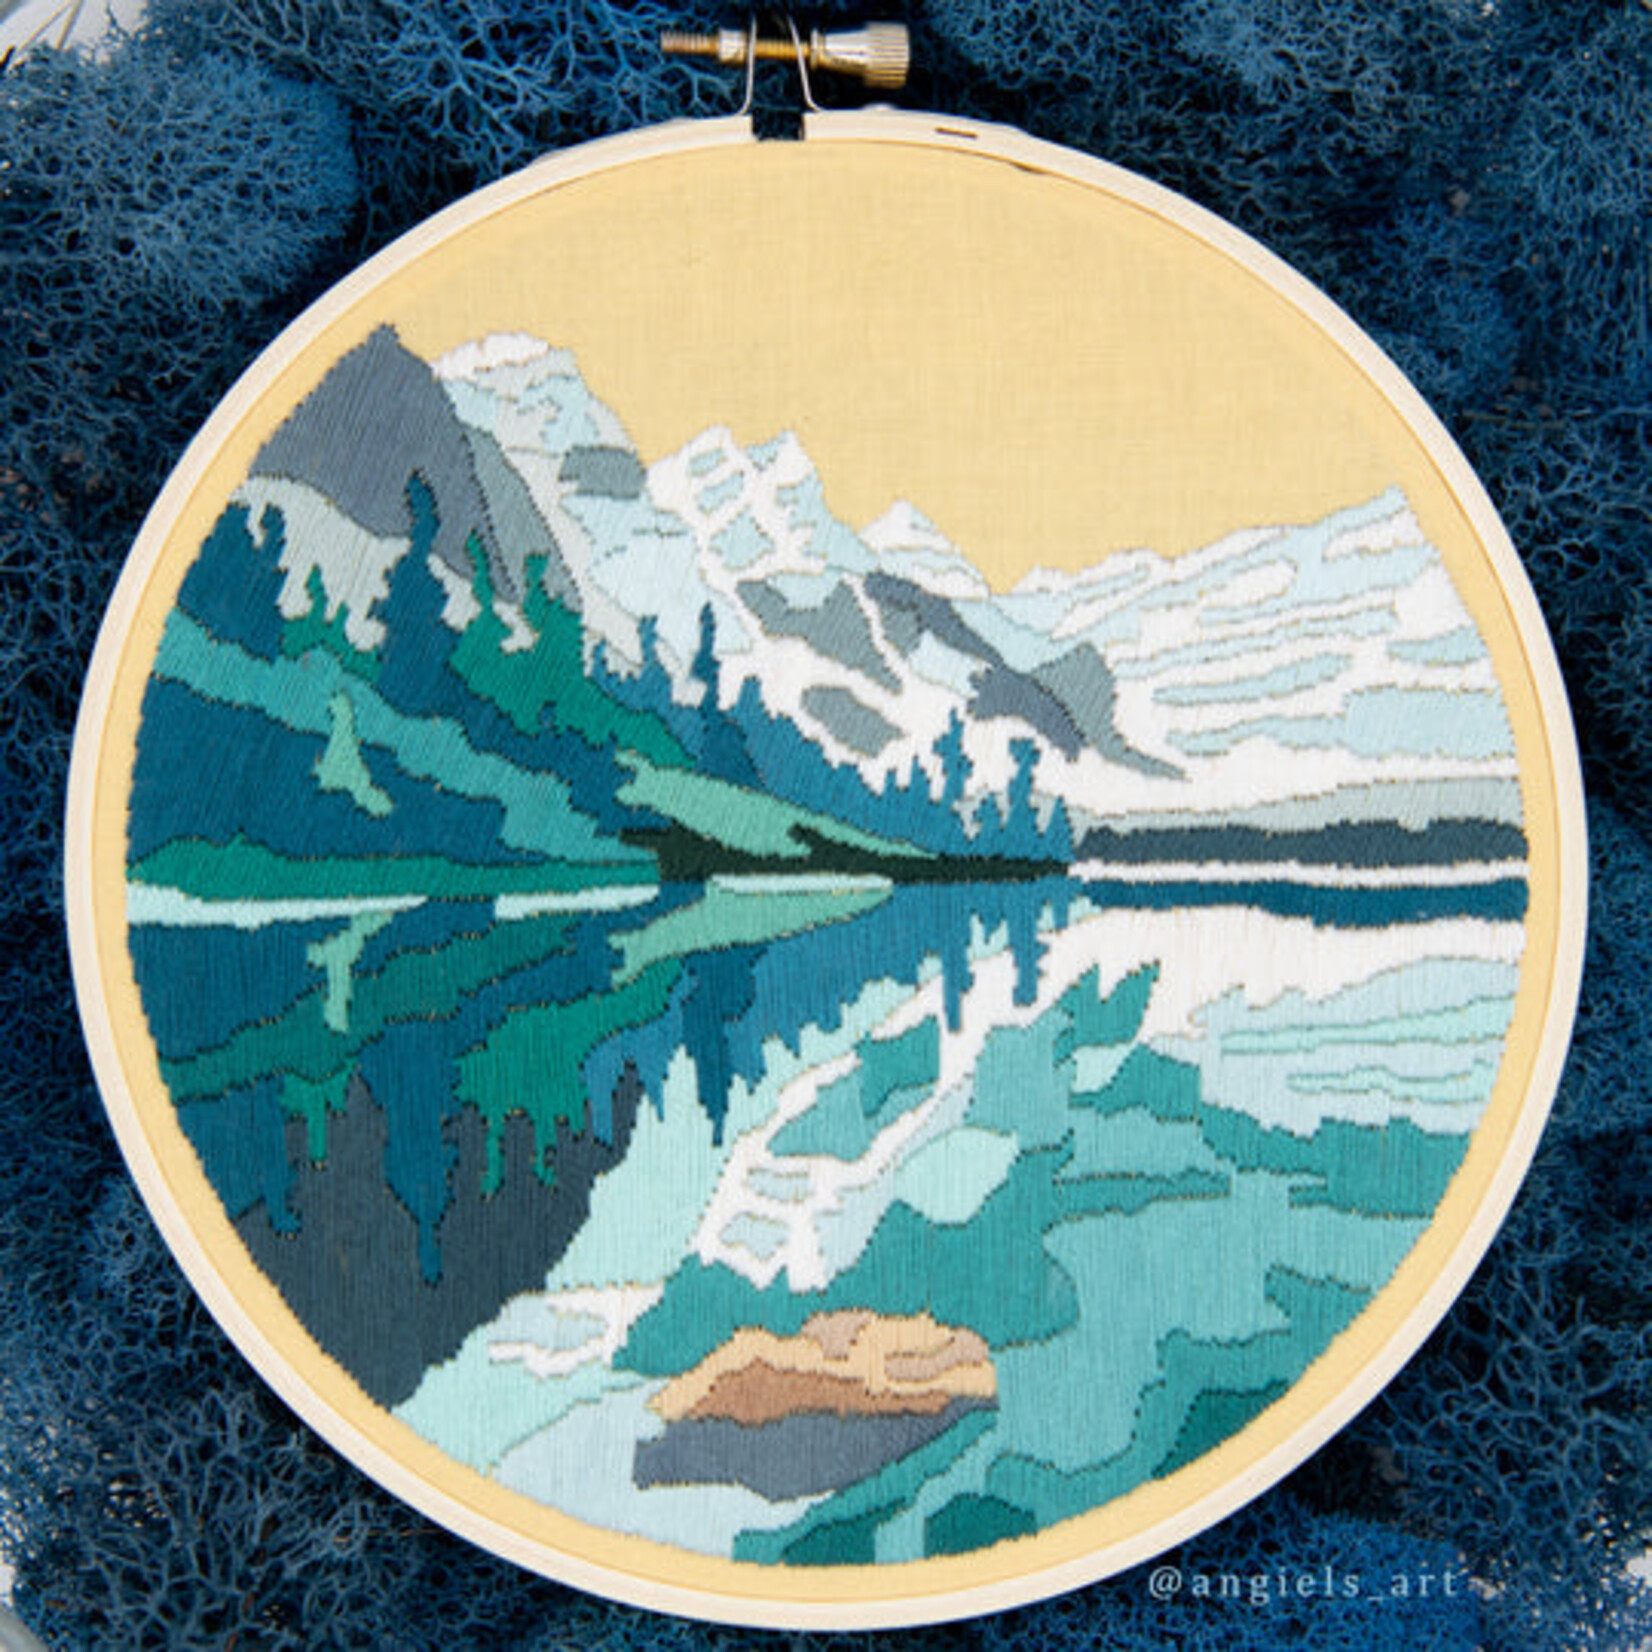 Anna Angiel Embroidery Kit - Moraine Lake - First Snow